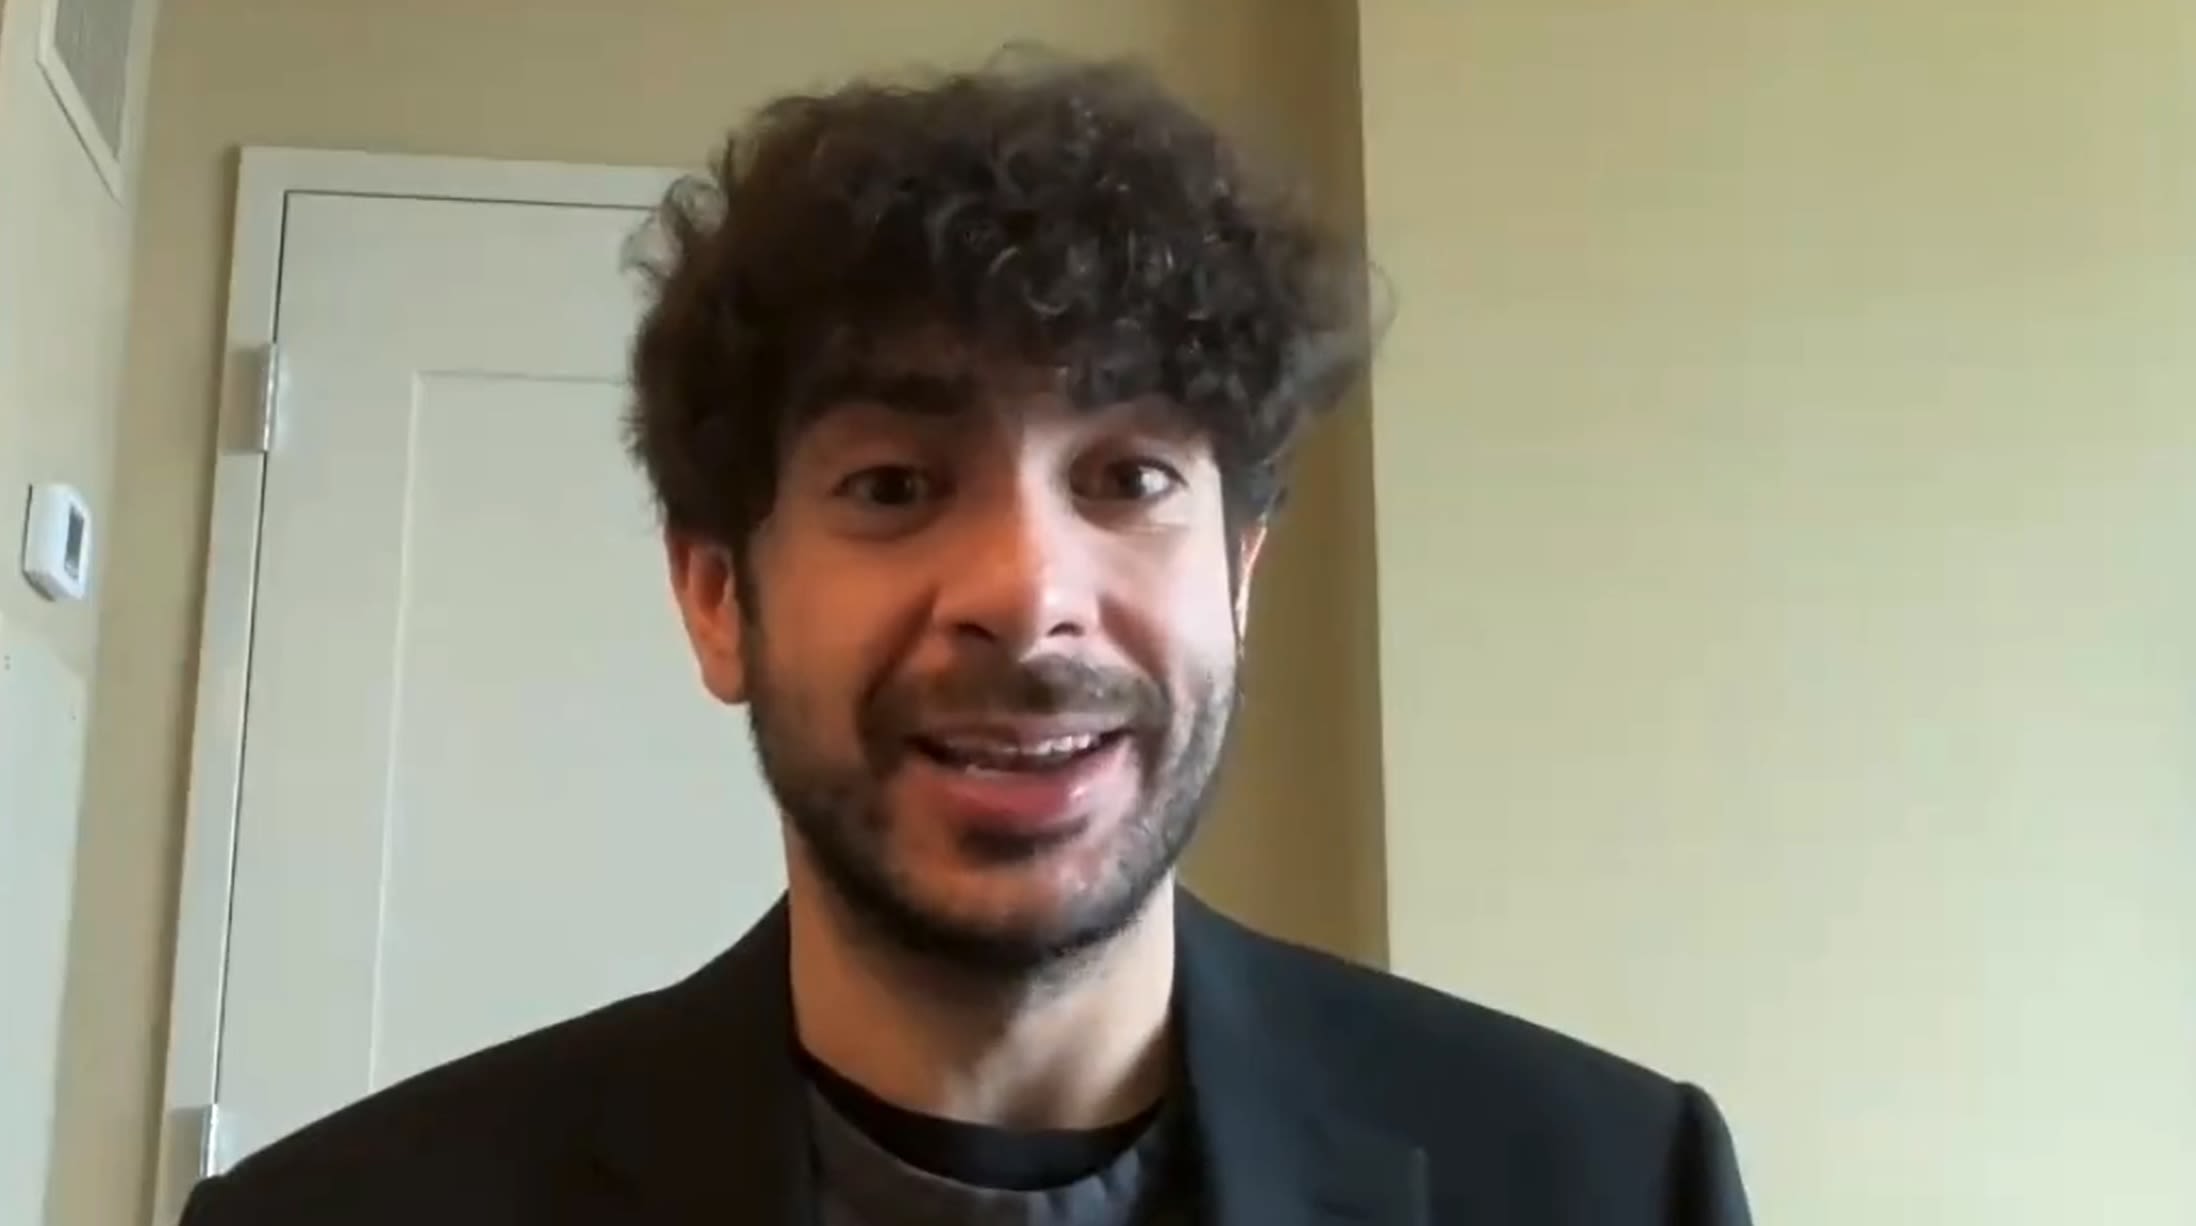 Tony Khan Discusses Wanting To Have The AEW Roster Back At Full Strength - PWMania - Wrestling News